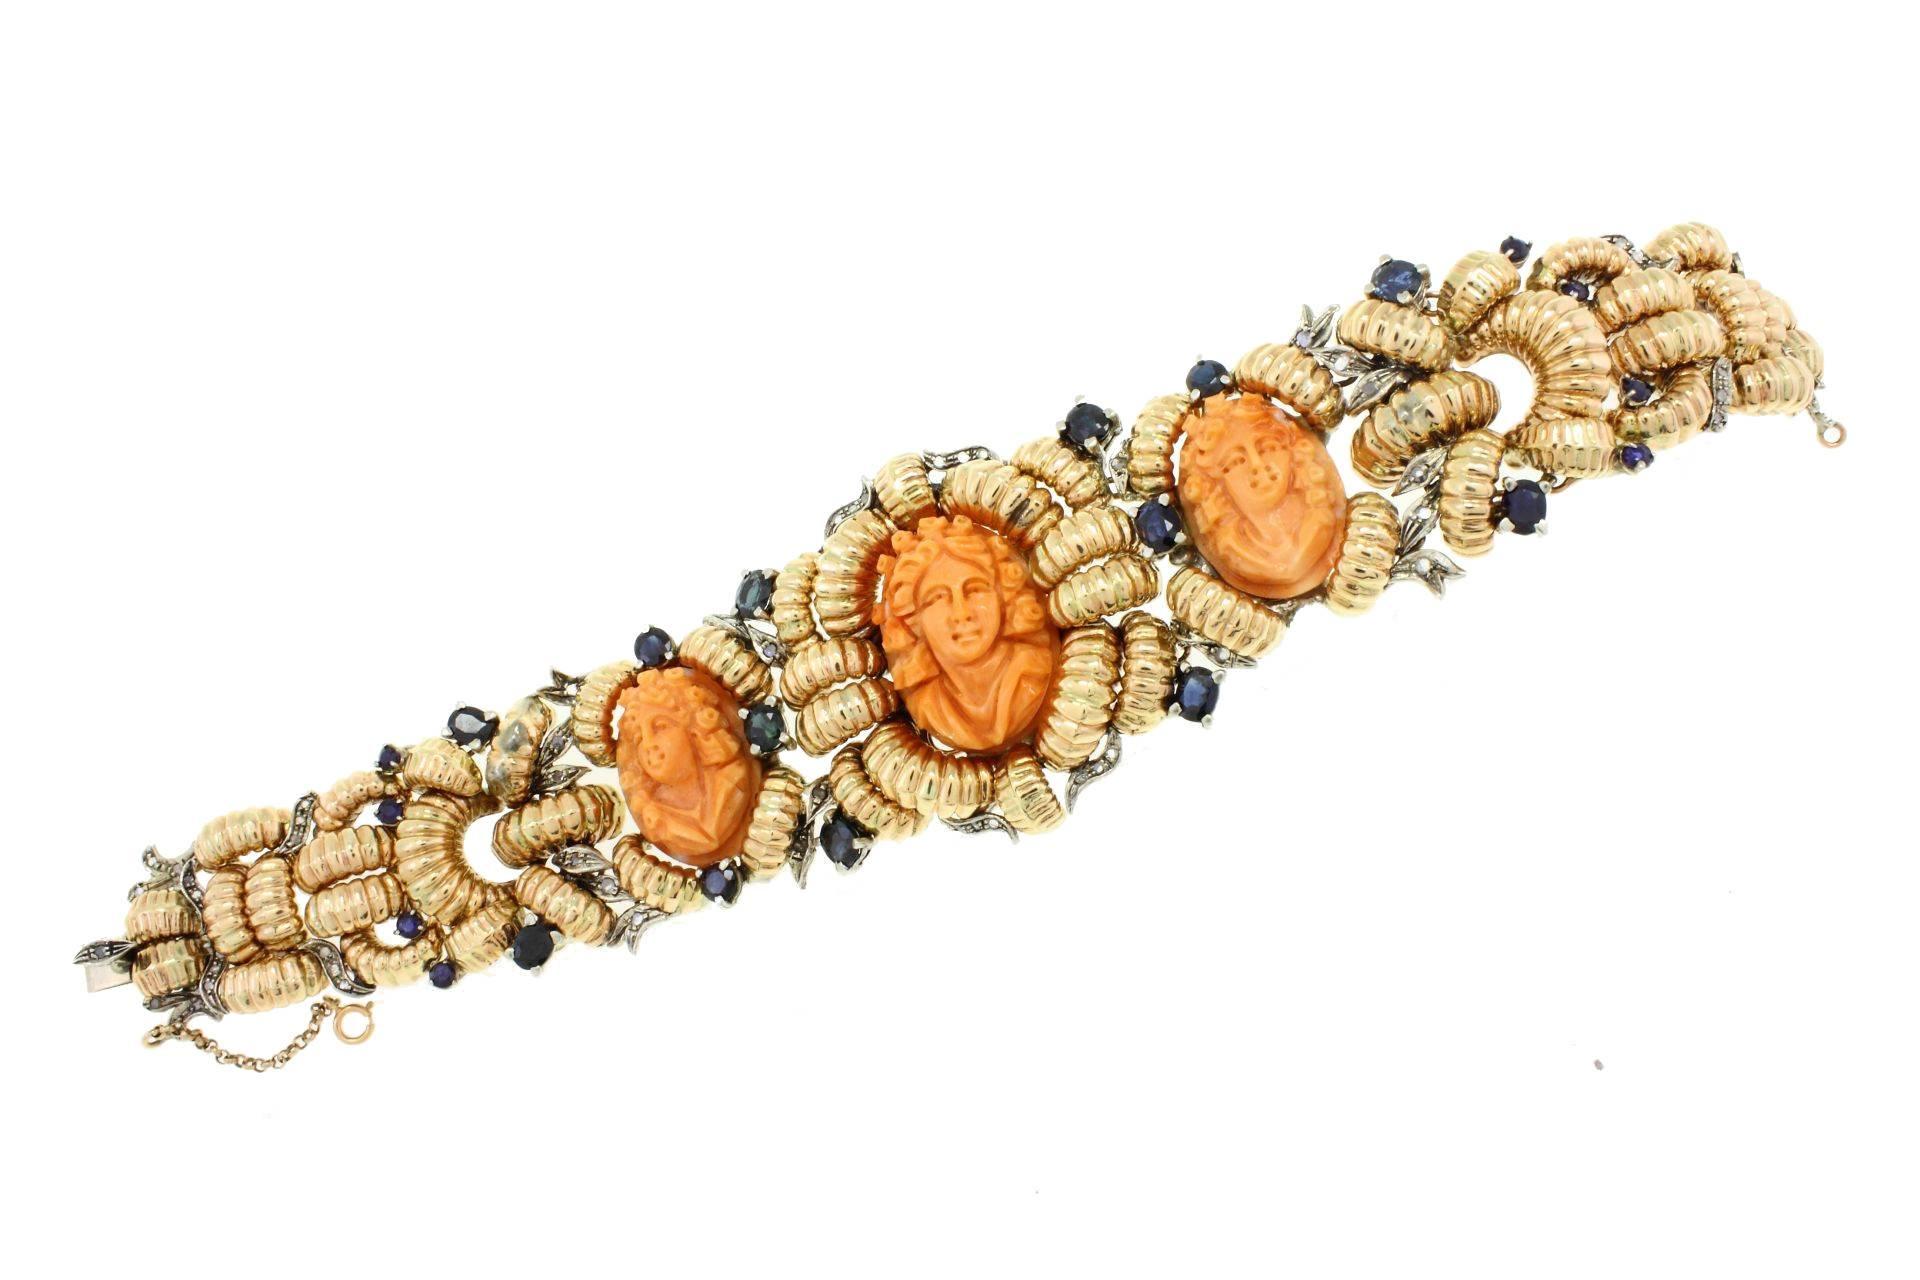 High quality design bracelet in 9Kt gold and silver adorned with diamonds and blue sapphires, which surround the three coral cameos.
diamonds(0.47Kt) 
blue sapphires(7.08Kt)
coral(10.00gr) 
Tot weight 75.6 gr
r.f. 780339

For any enquires, please